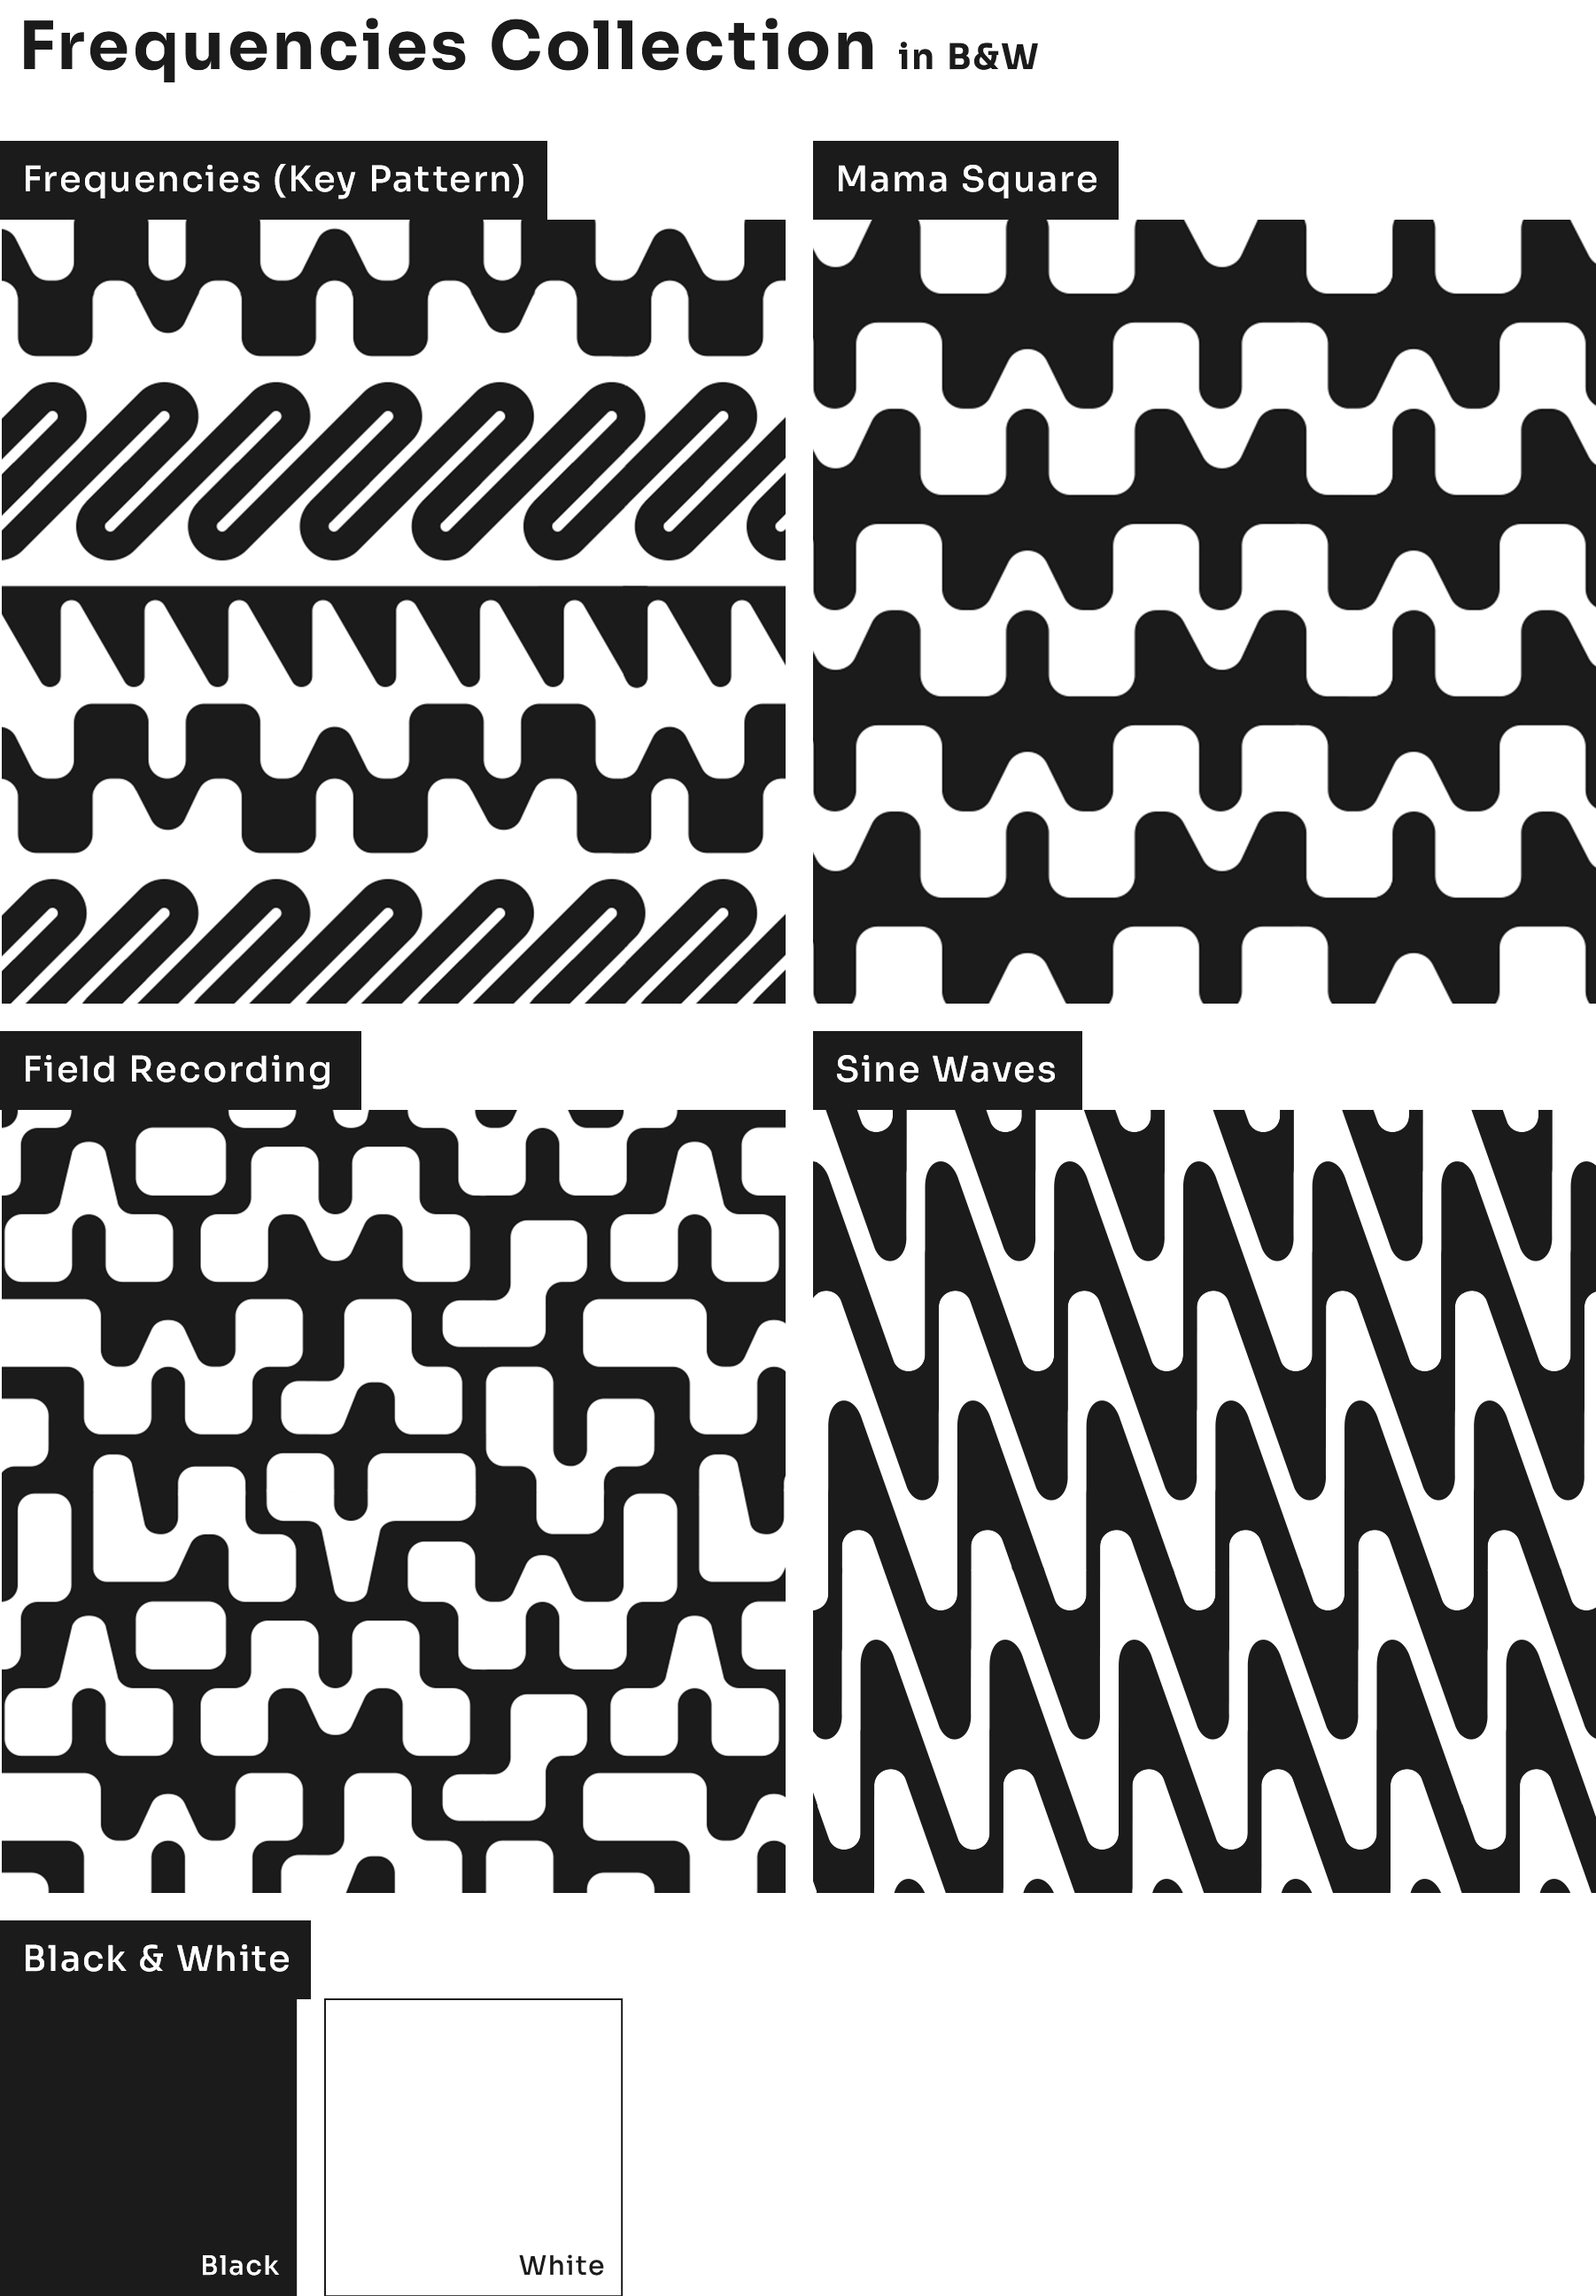 Frequencies pattern collection in black and white